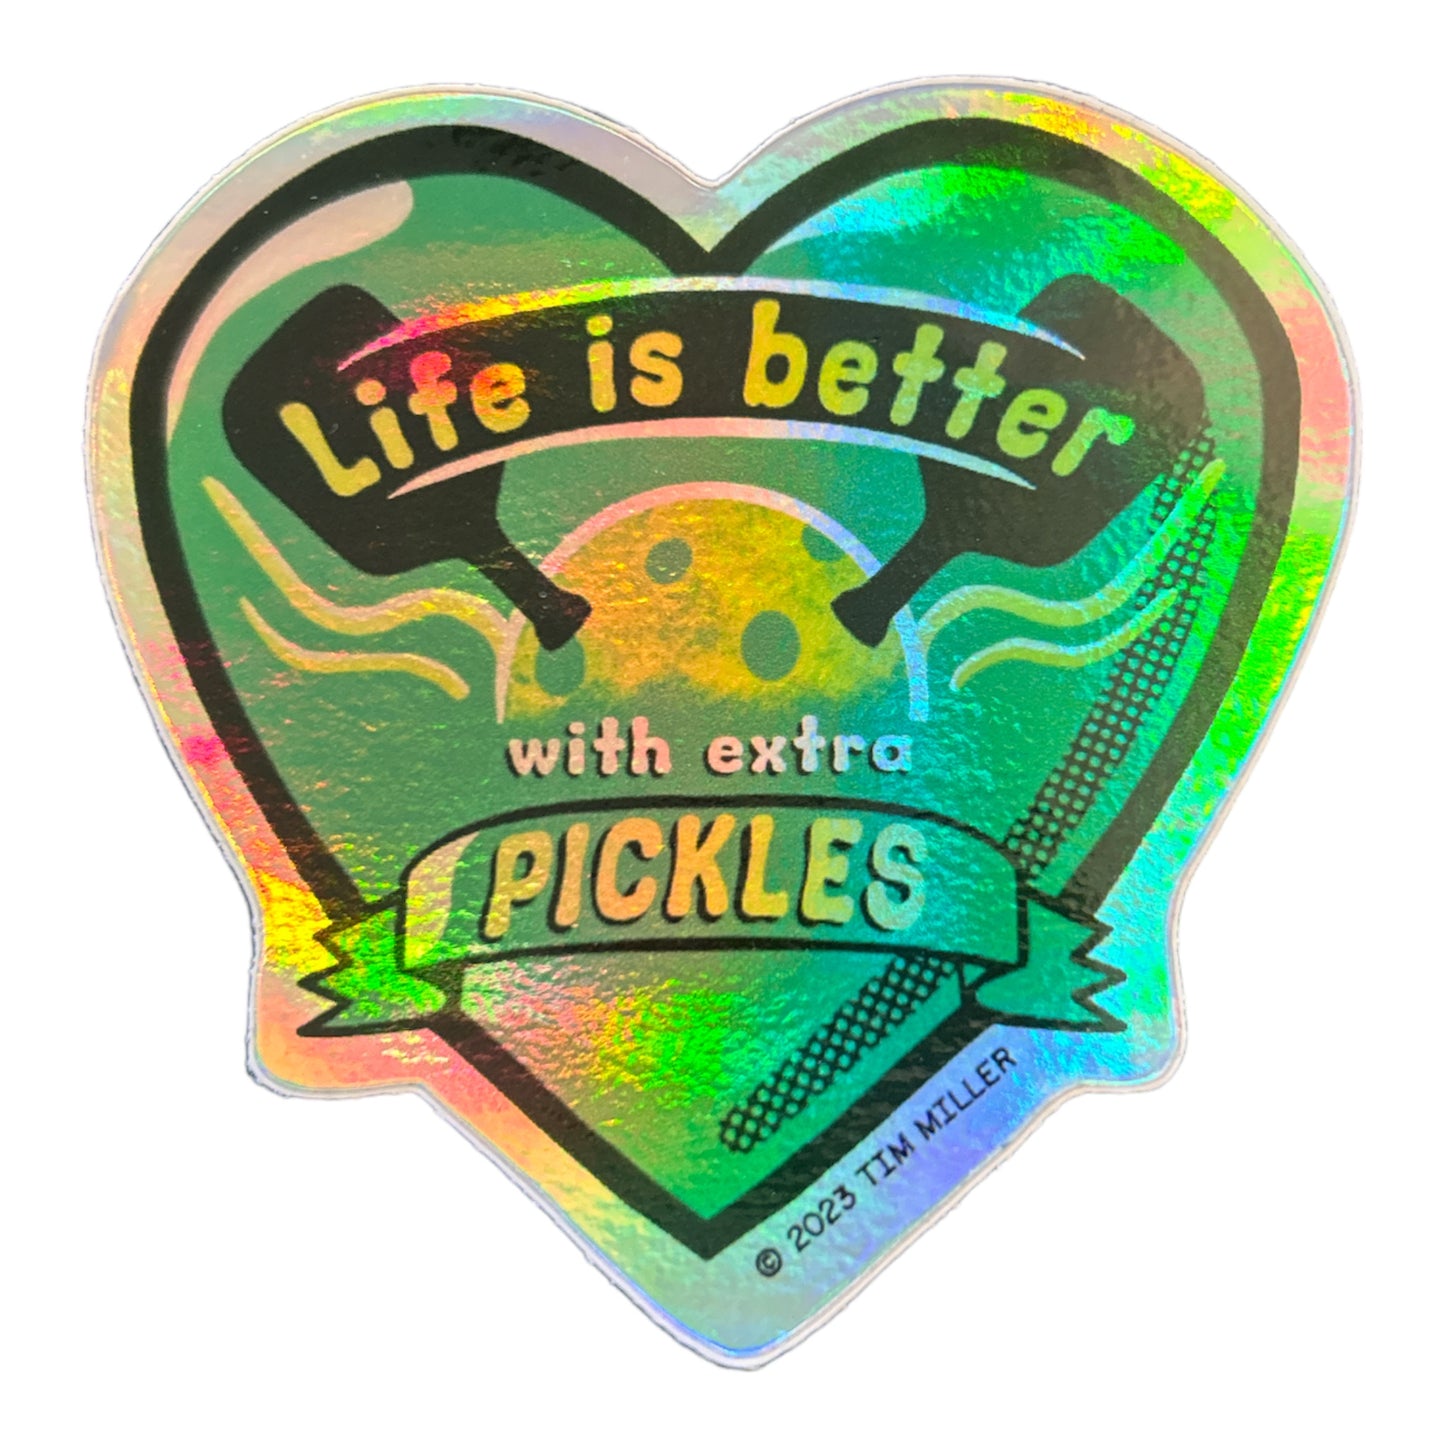 Life is better with extra Pickles Vinyl Sticker